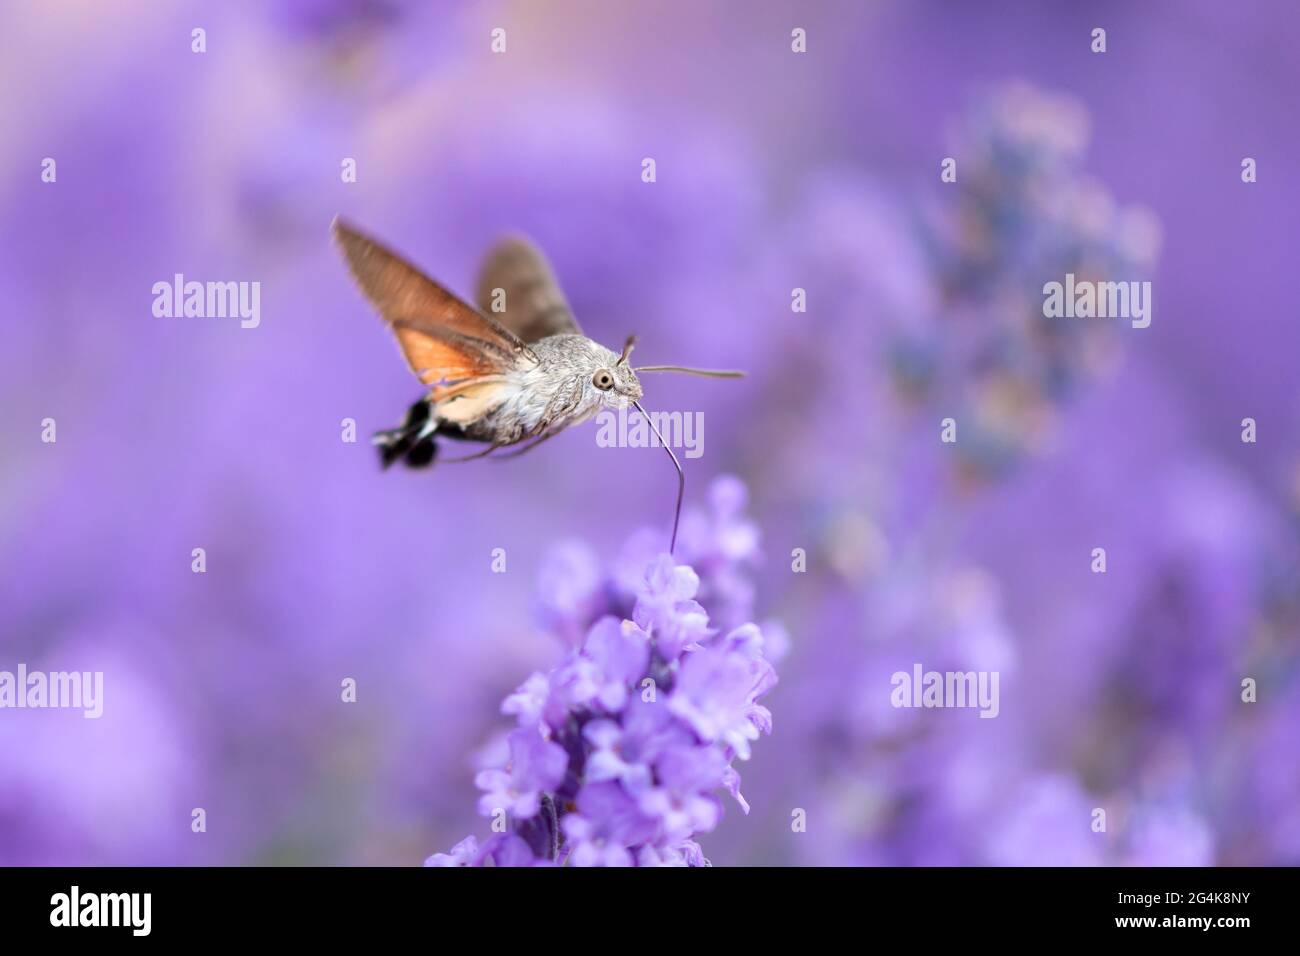 The hummingbird hawk-moth (Macroglossum stellatarum) is a species of hawk moth found across temperate regions of Eurasia. The species is named for its Stock Photo